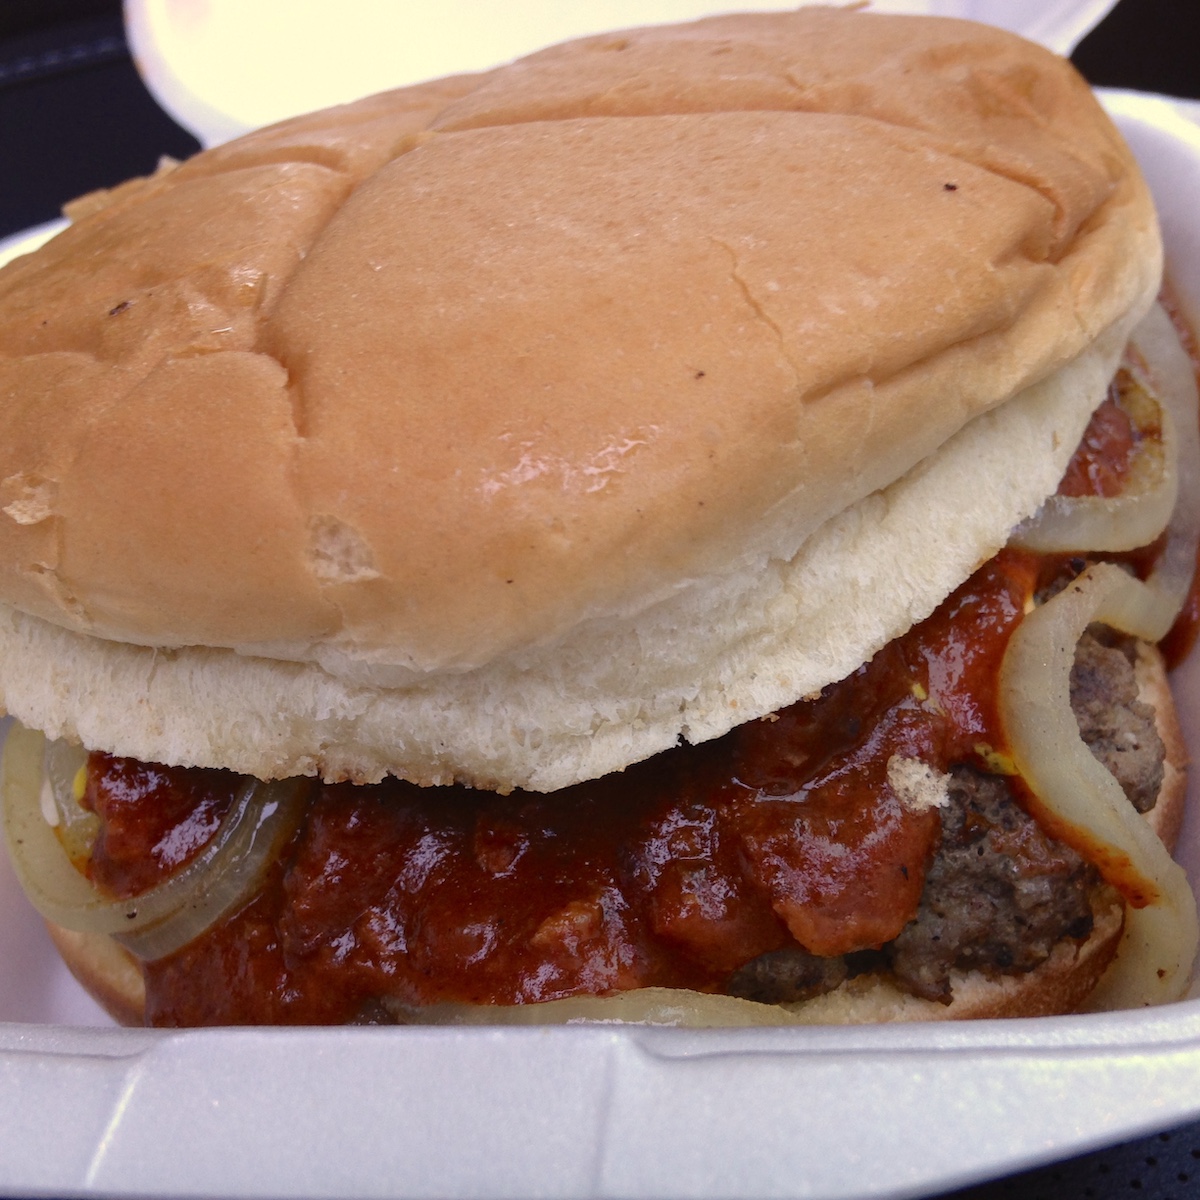 Chili Cheese Burger from Owens Burger Shack in Clarksdale, Mississippi